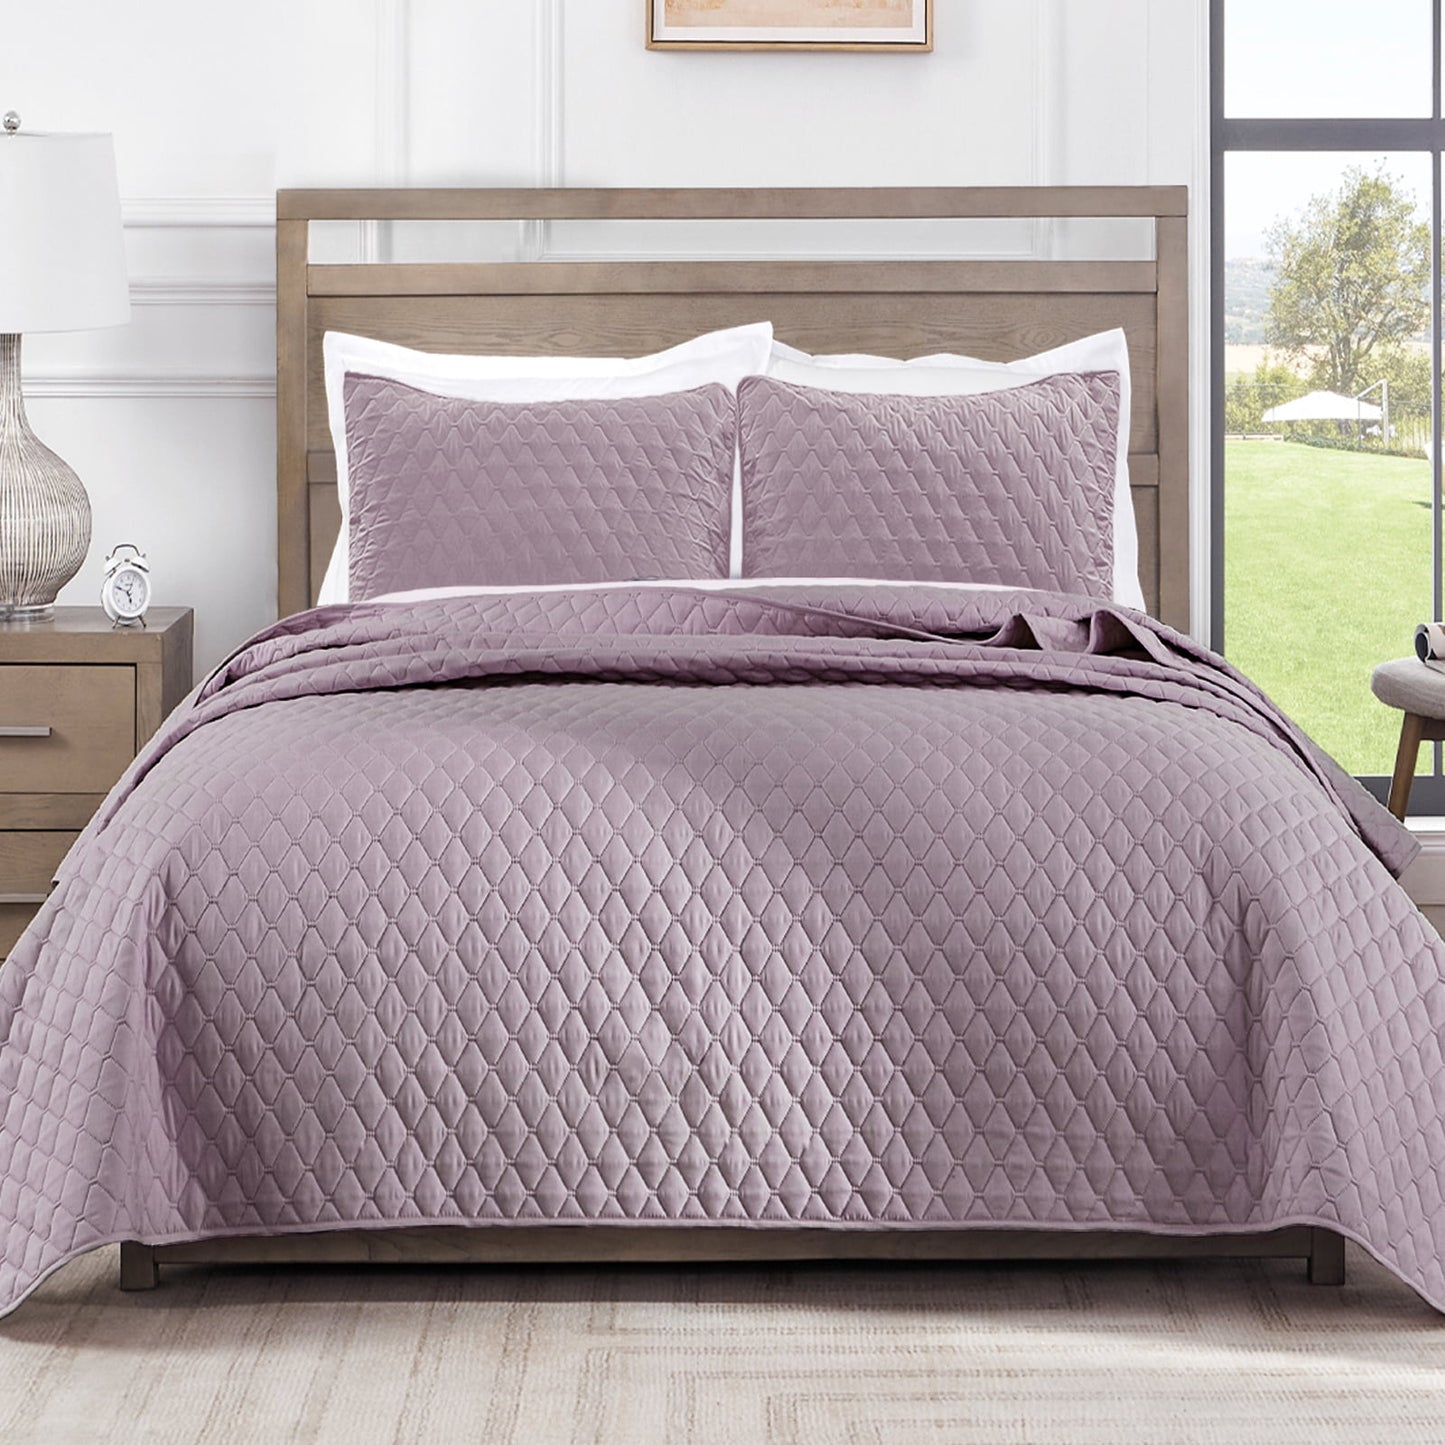 Exclusivo Mezcla Ultrasonic Reversible Twin Quilt Bedding Set with Pillow Sham, Lightweight Quilts Twin Size, Soft Bedspreads Bed Coverlets for All Seasons - (Lilac Ash, 68"x88")